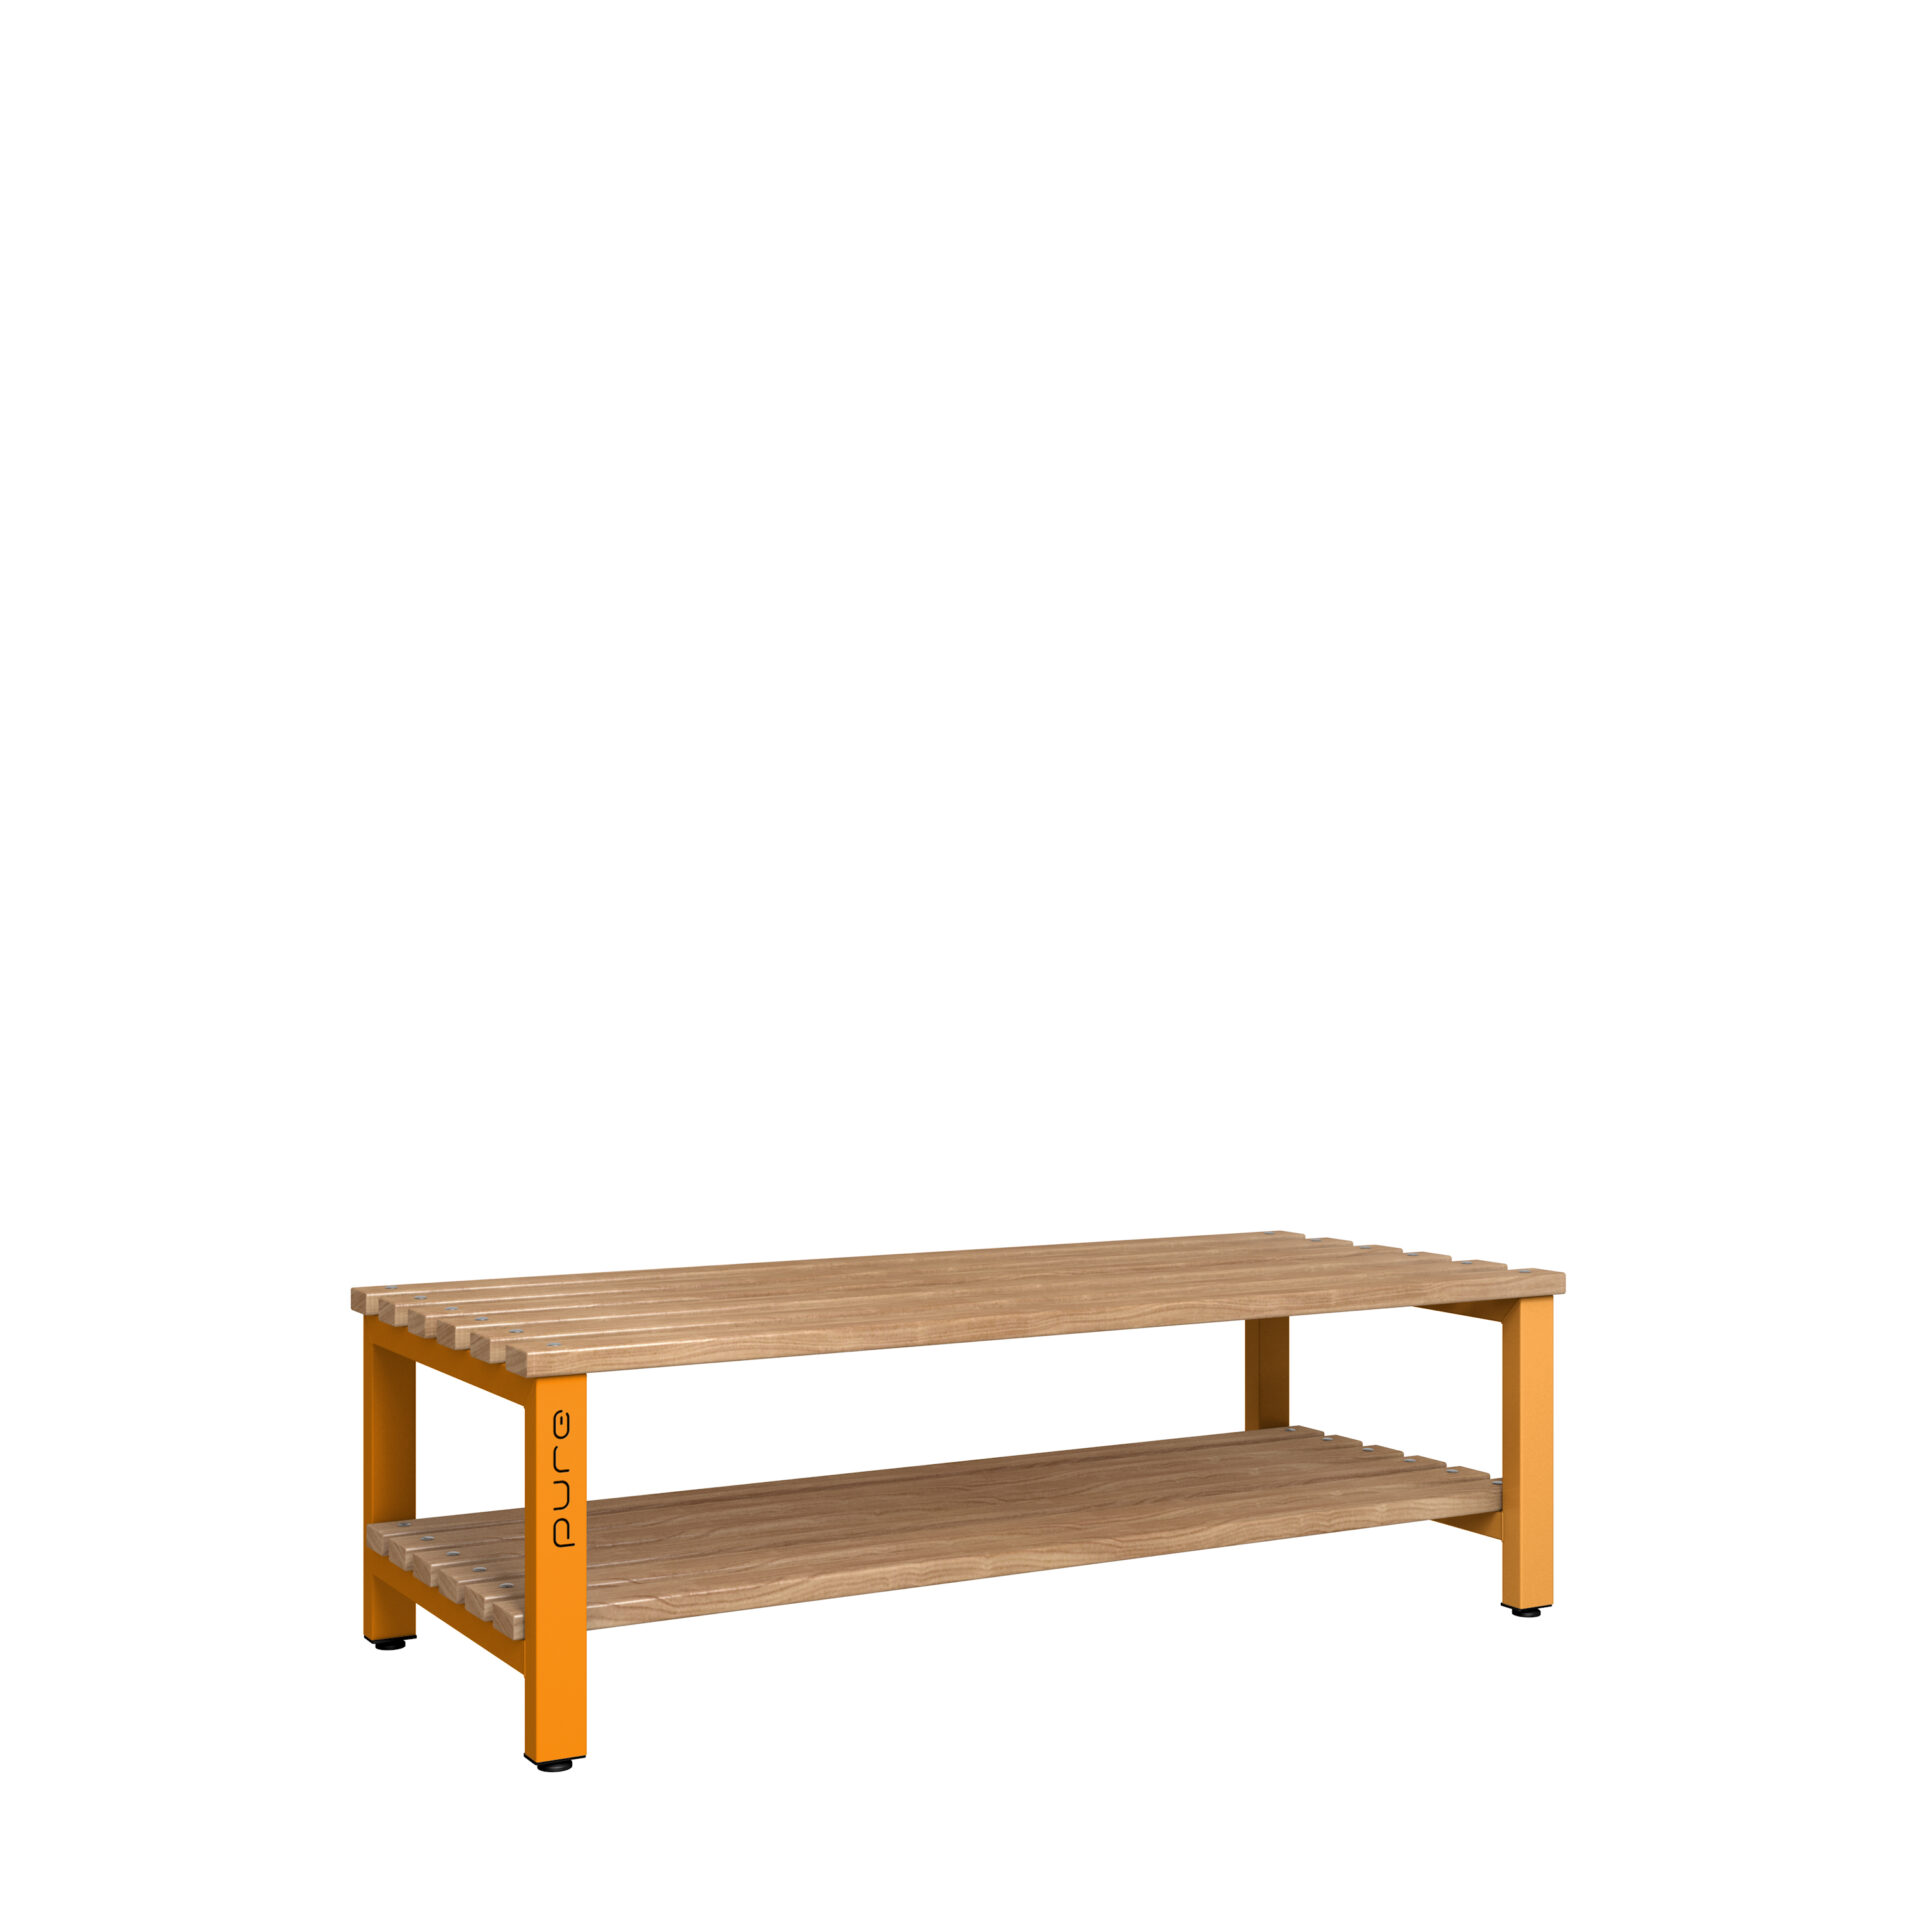 Pure Carbon Zero Double Sided 1500mm Standard Bench With Shoe Shelf - Magma Orange / Solid Timber